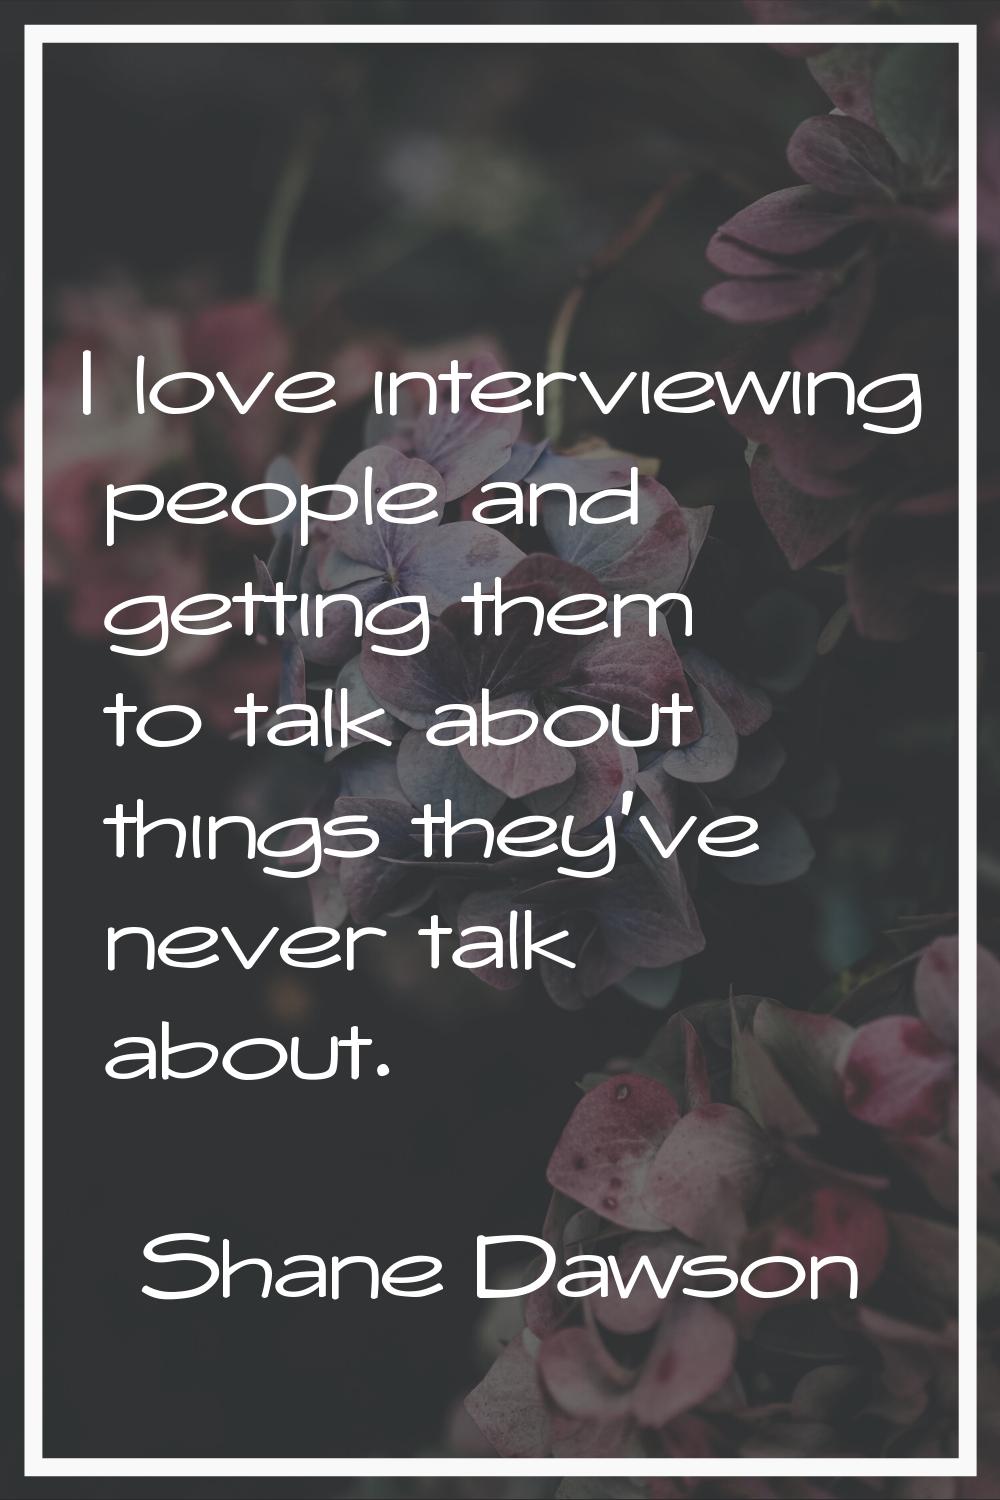 I love interviewing people and getting them to talk about things they've never talk about.